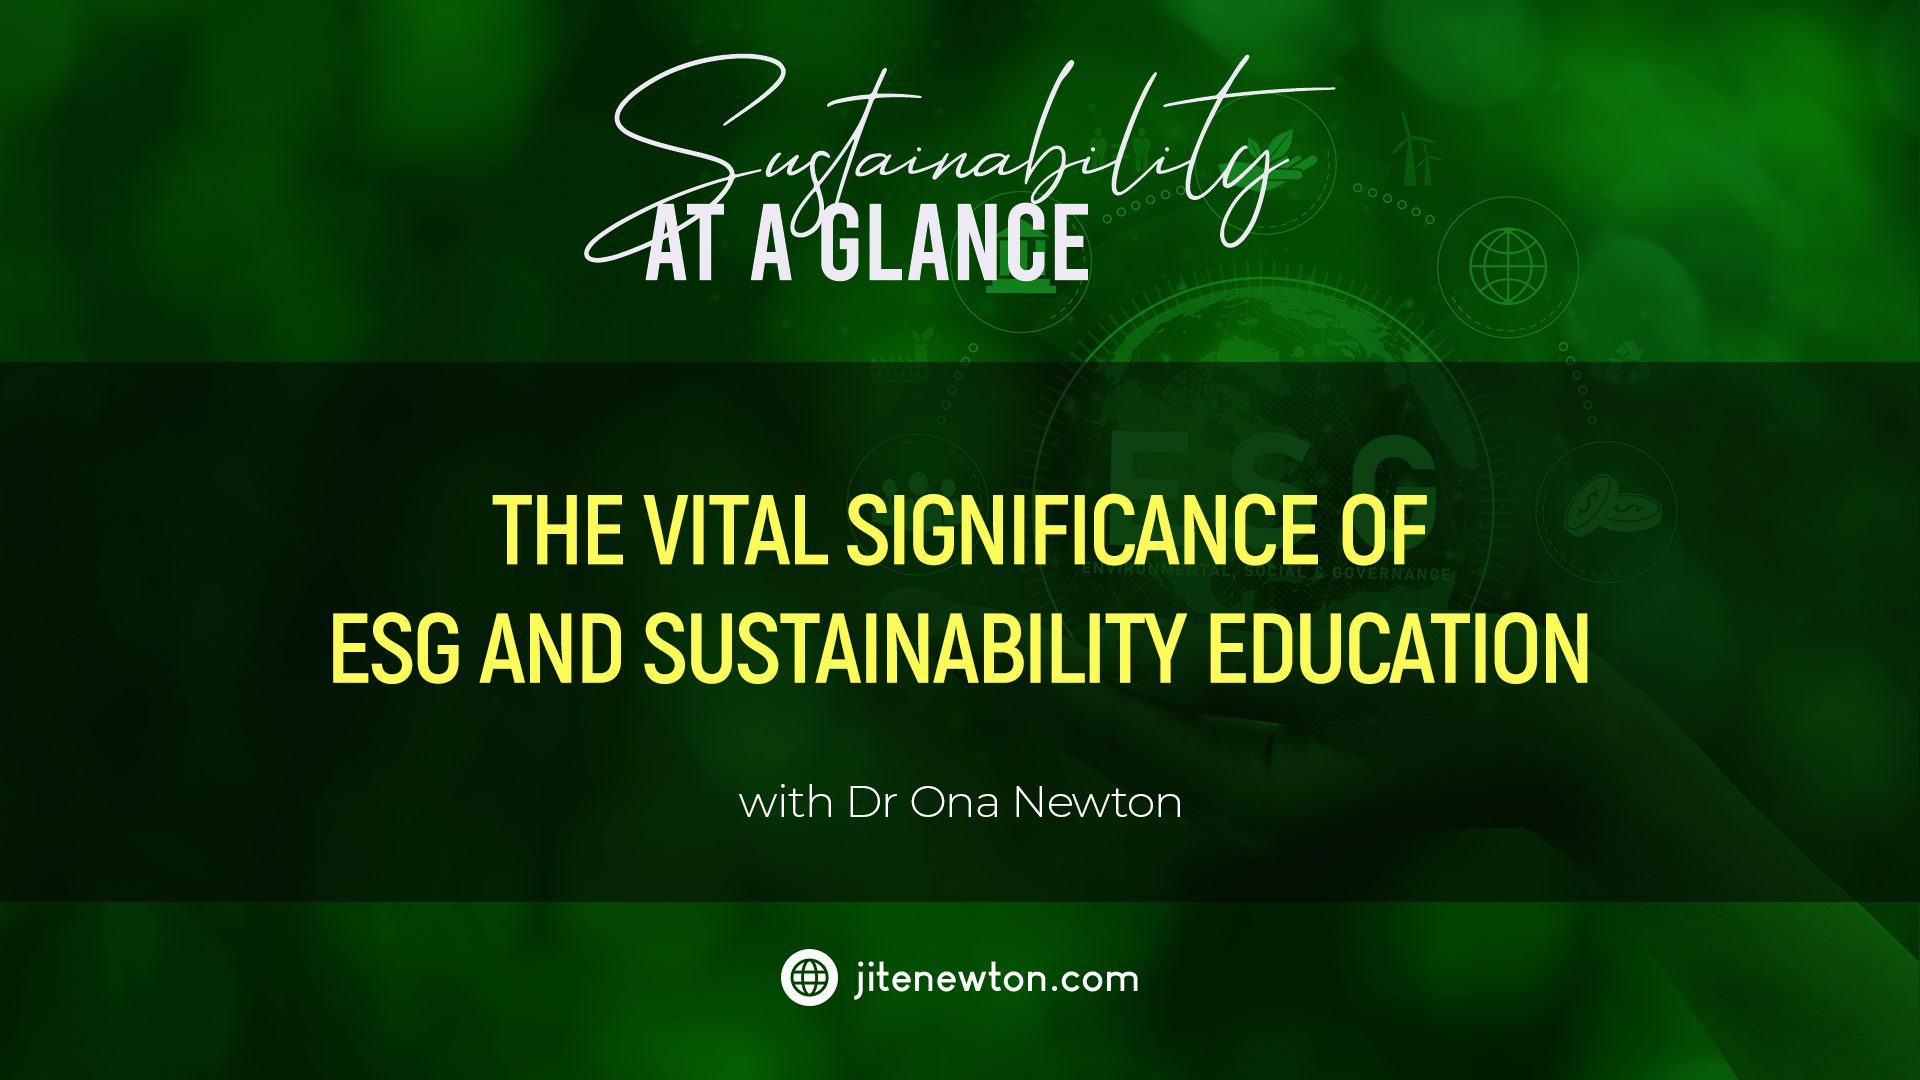 The Vital Significance of ESG and Sustainability Education